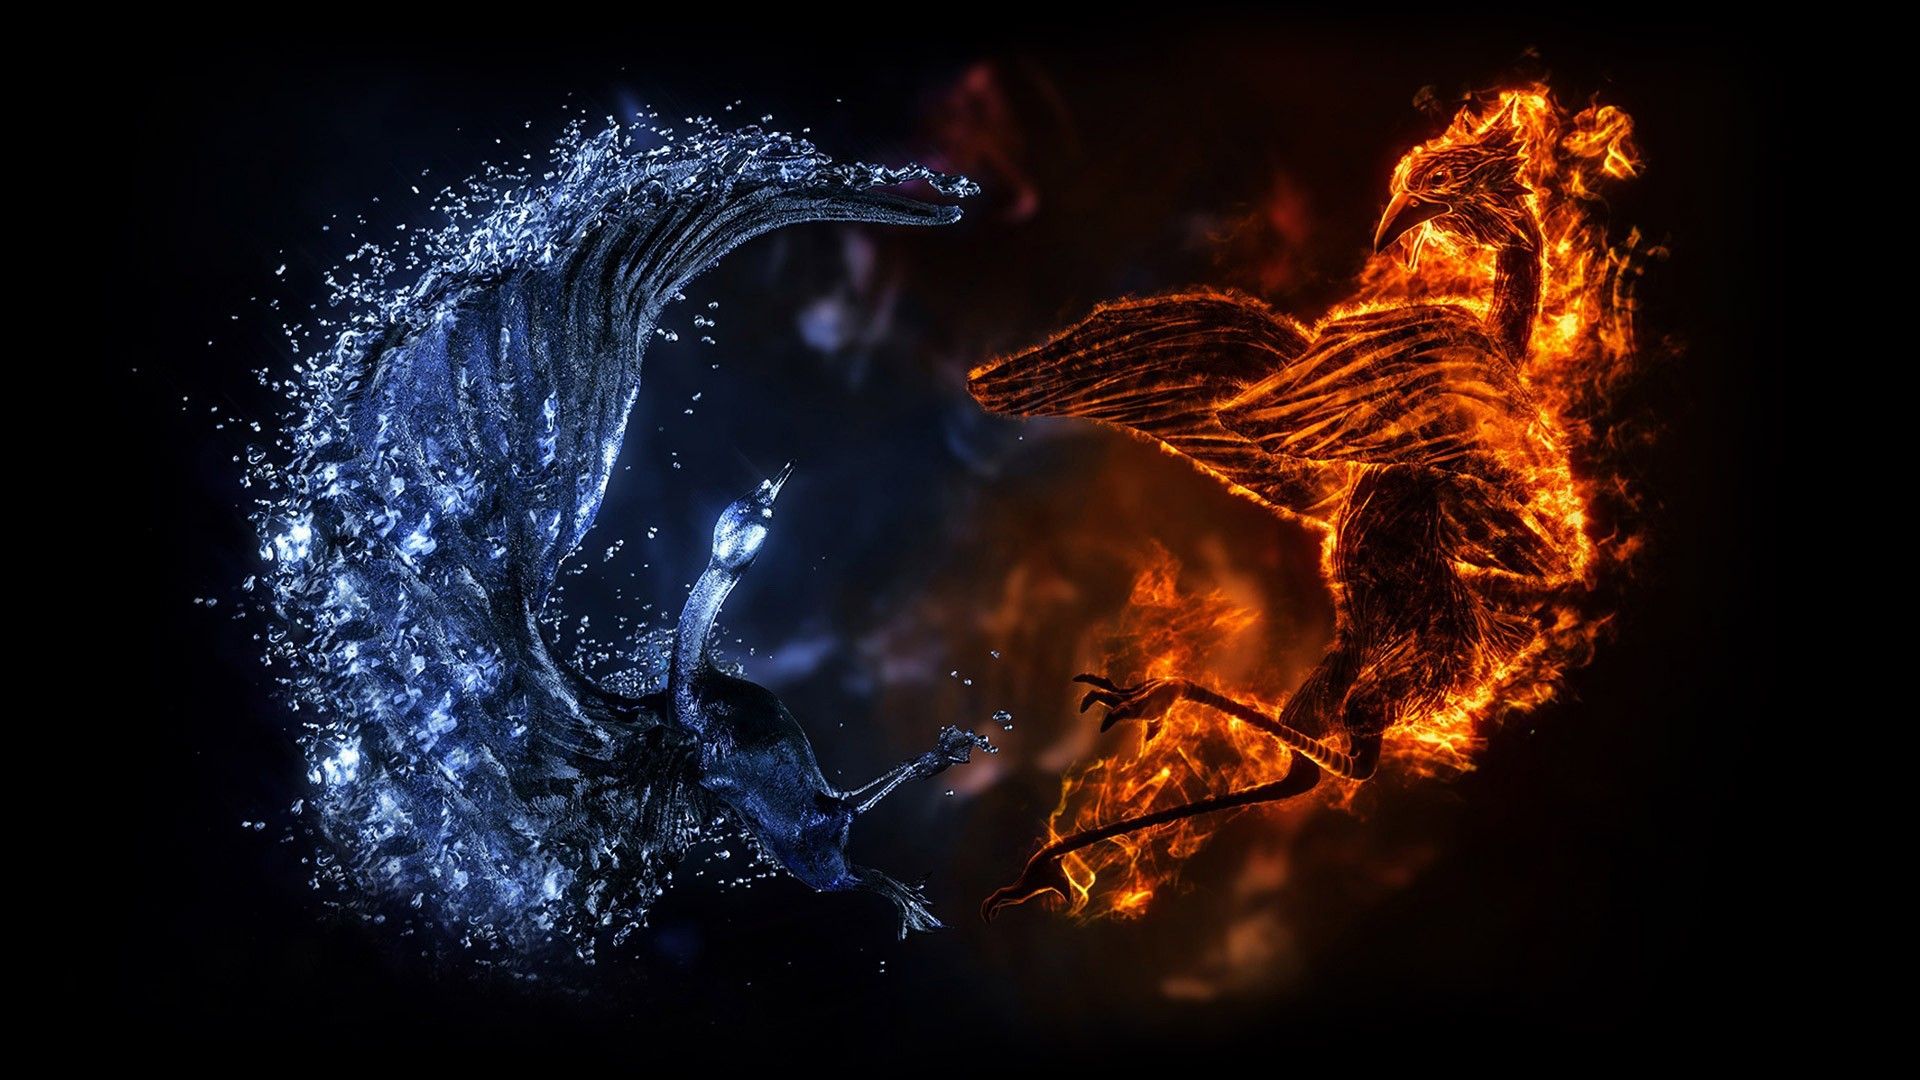 Battle of fire and water dragons wallpaper and image. Fire and ice wallpaper, Fire and ice, Amazing HD wallpaper